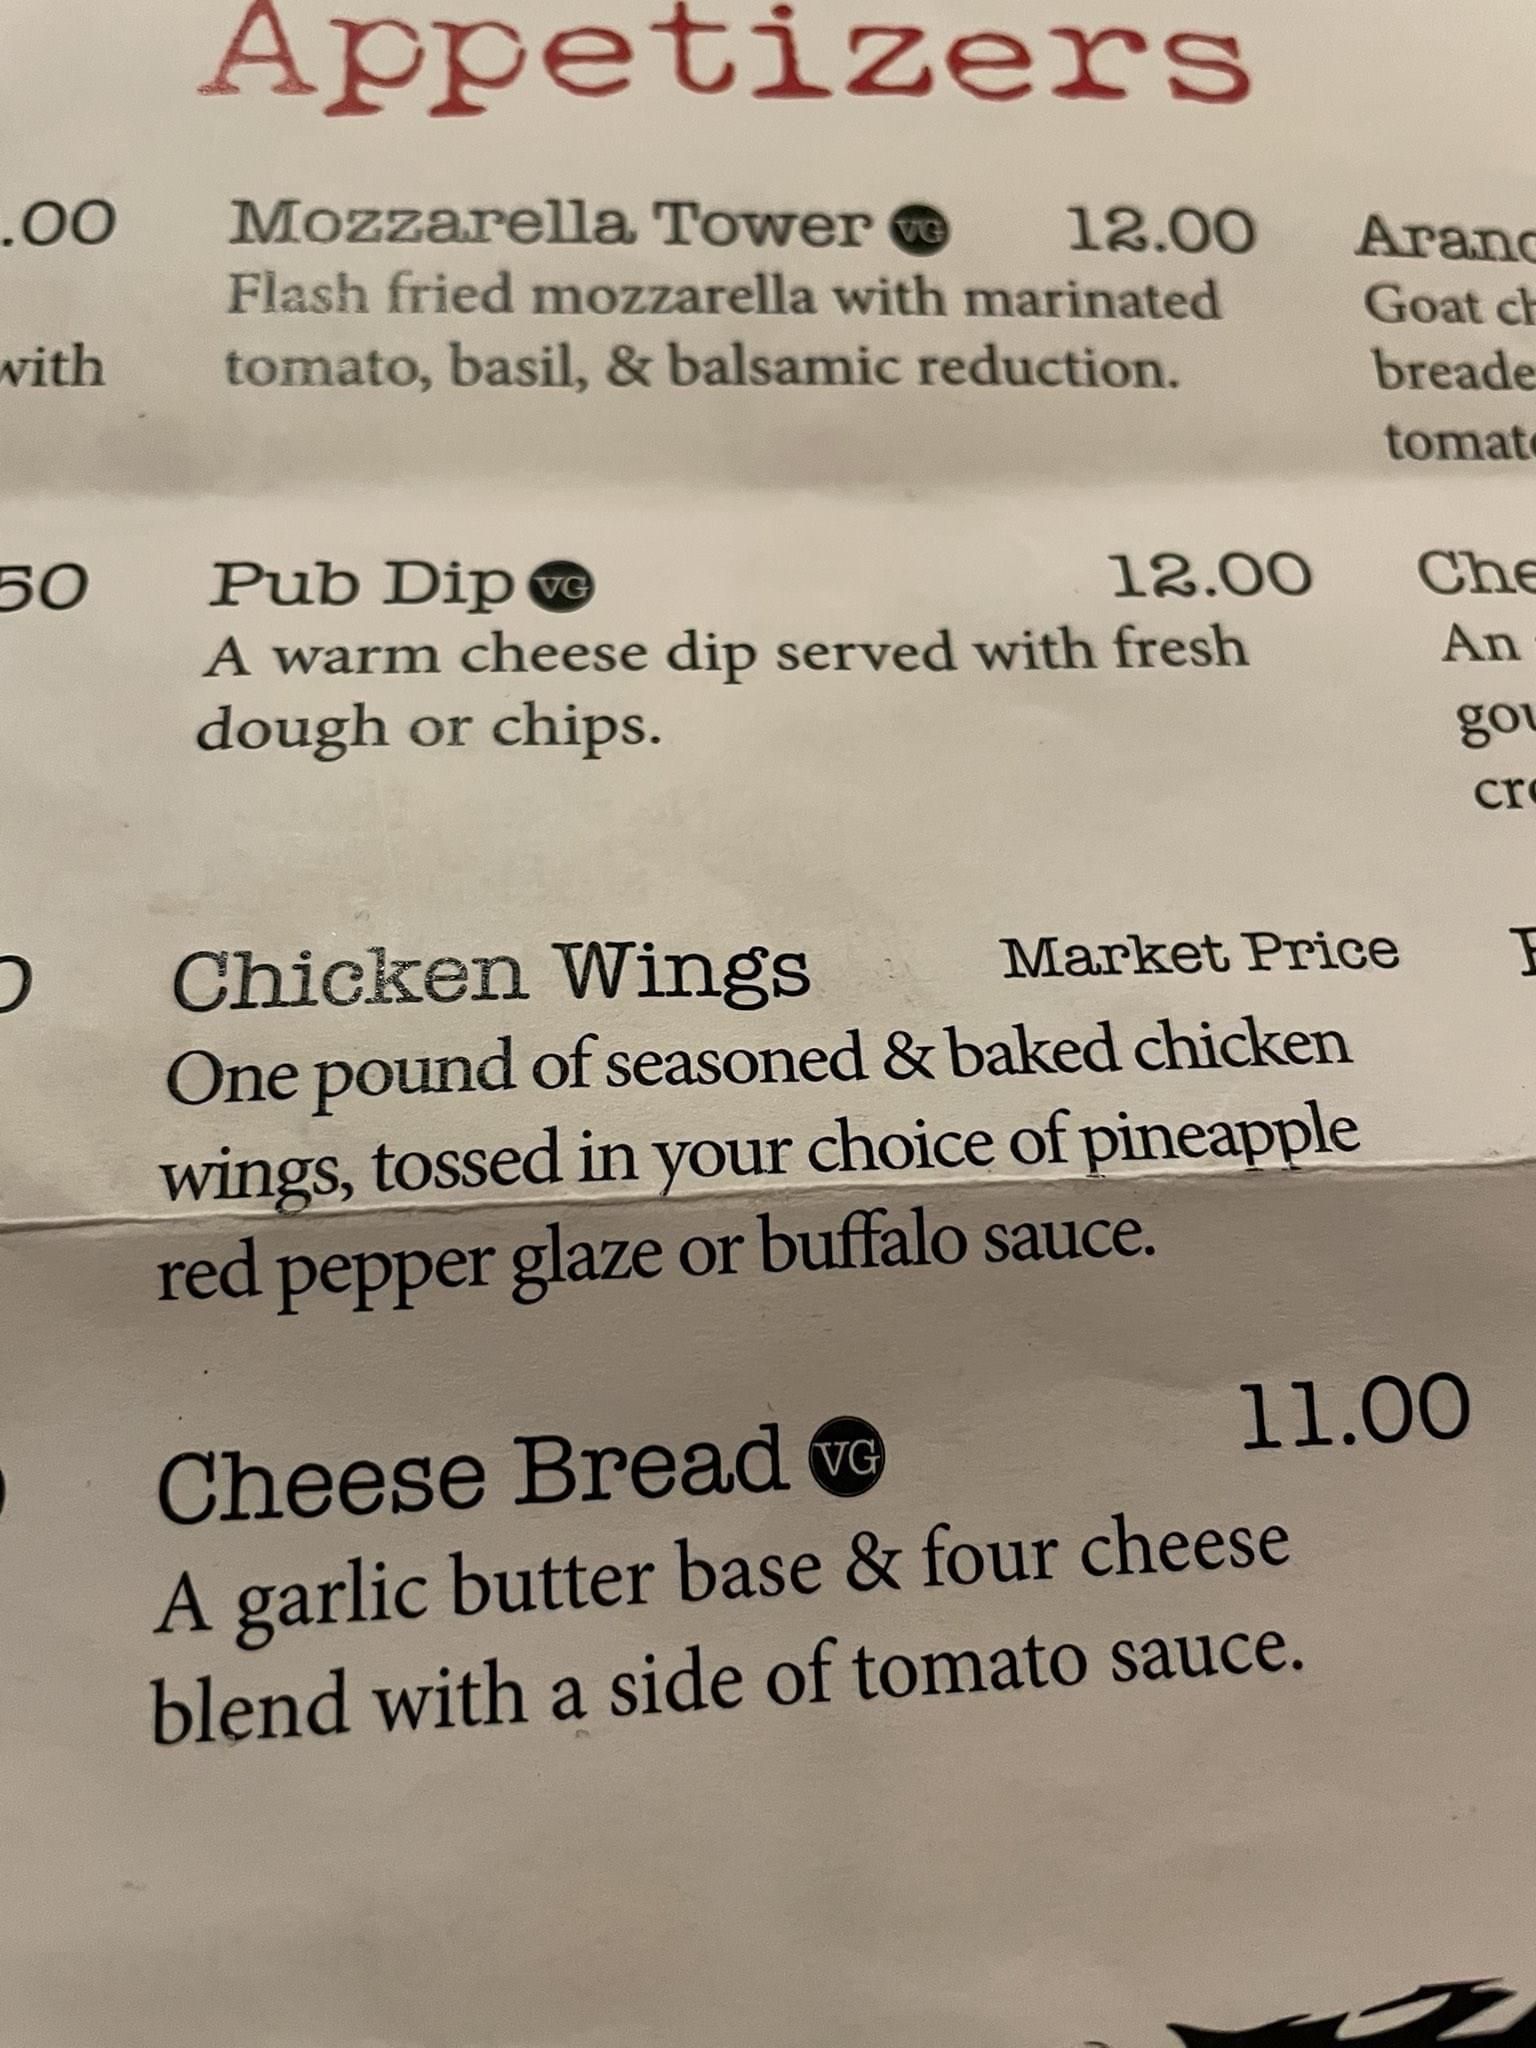 You know inflation is out of control when chicken wings are "market price"...